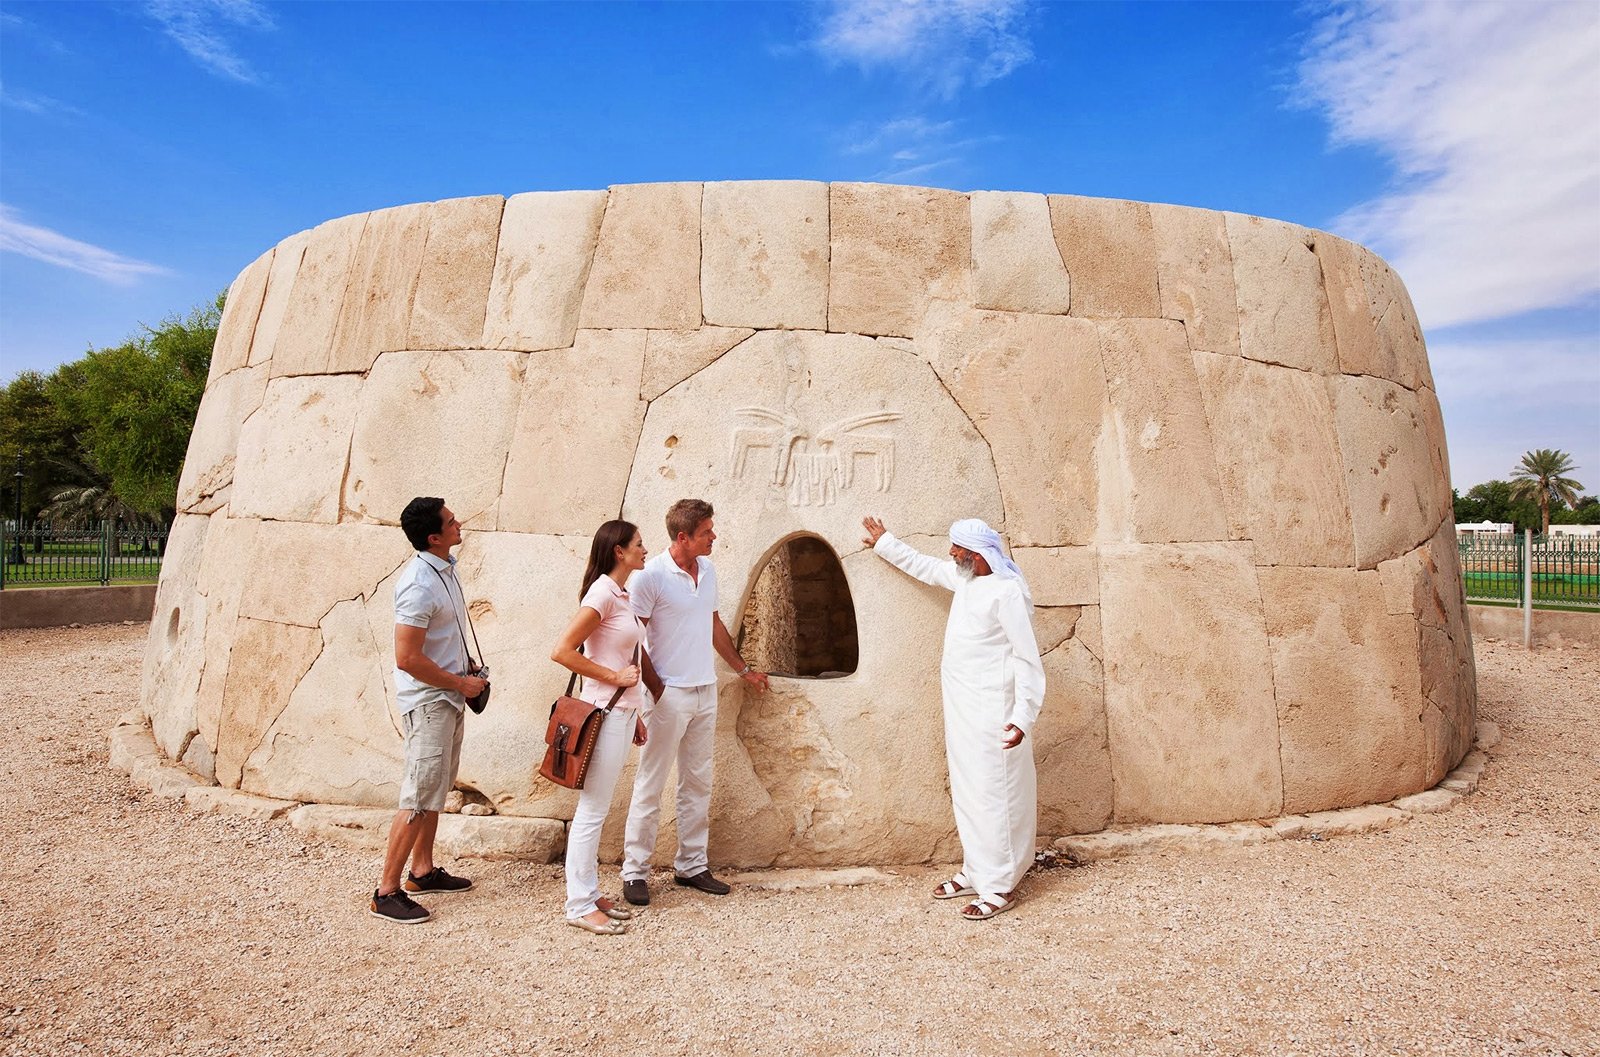 How to see the Hili Tomb in Al Ain